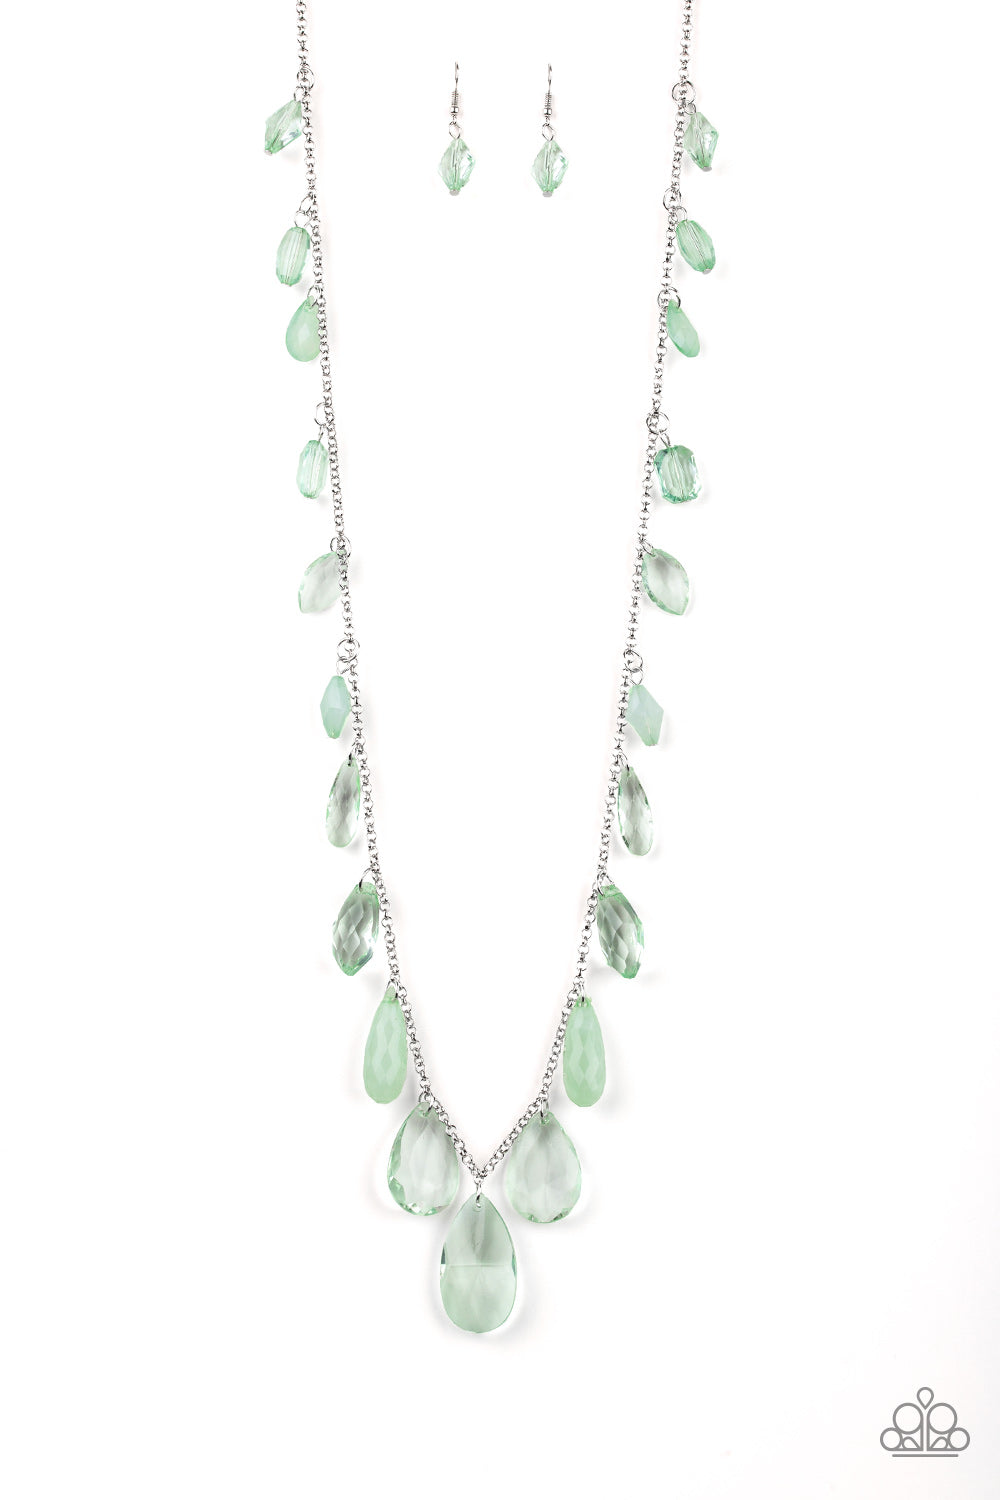 Paparazzi Necklaces - Glow and Steady Wins The Race - Green